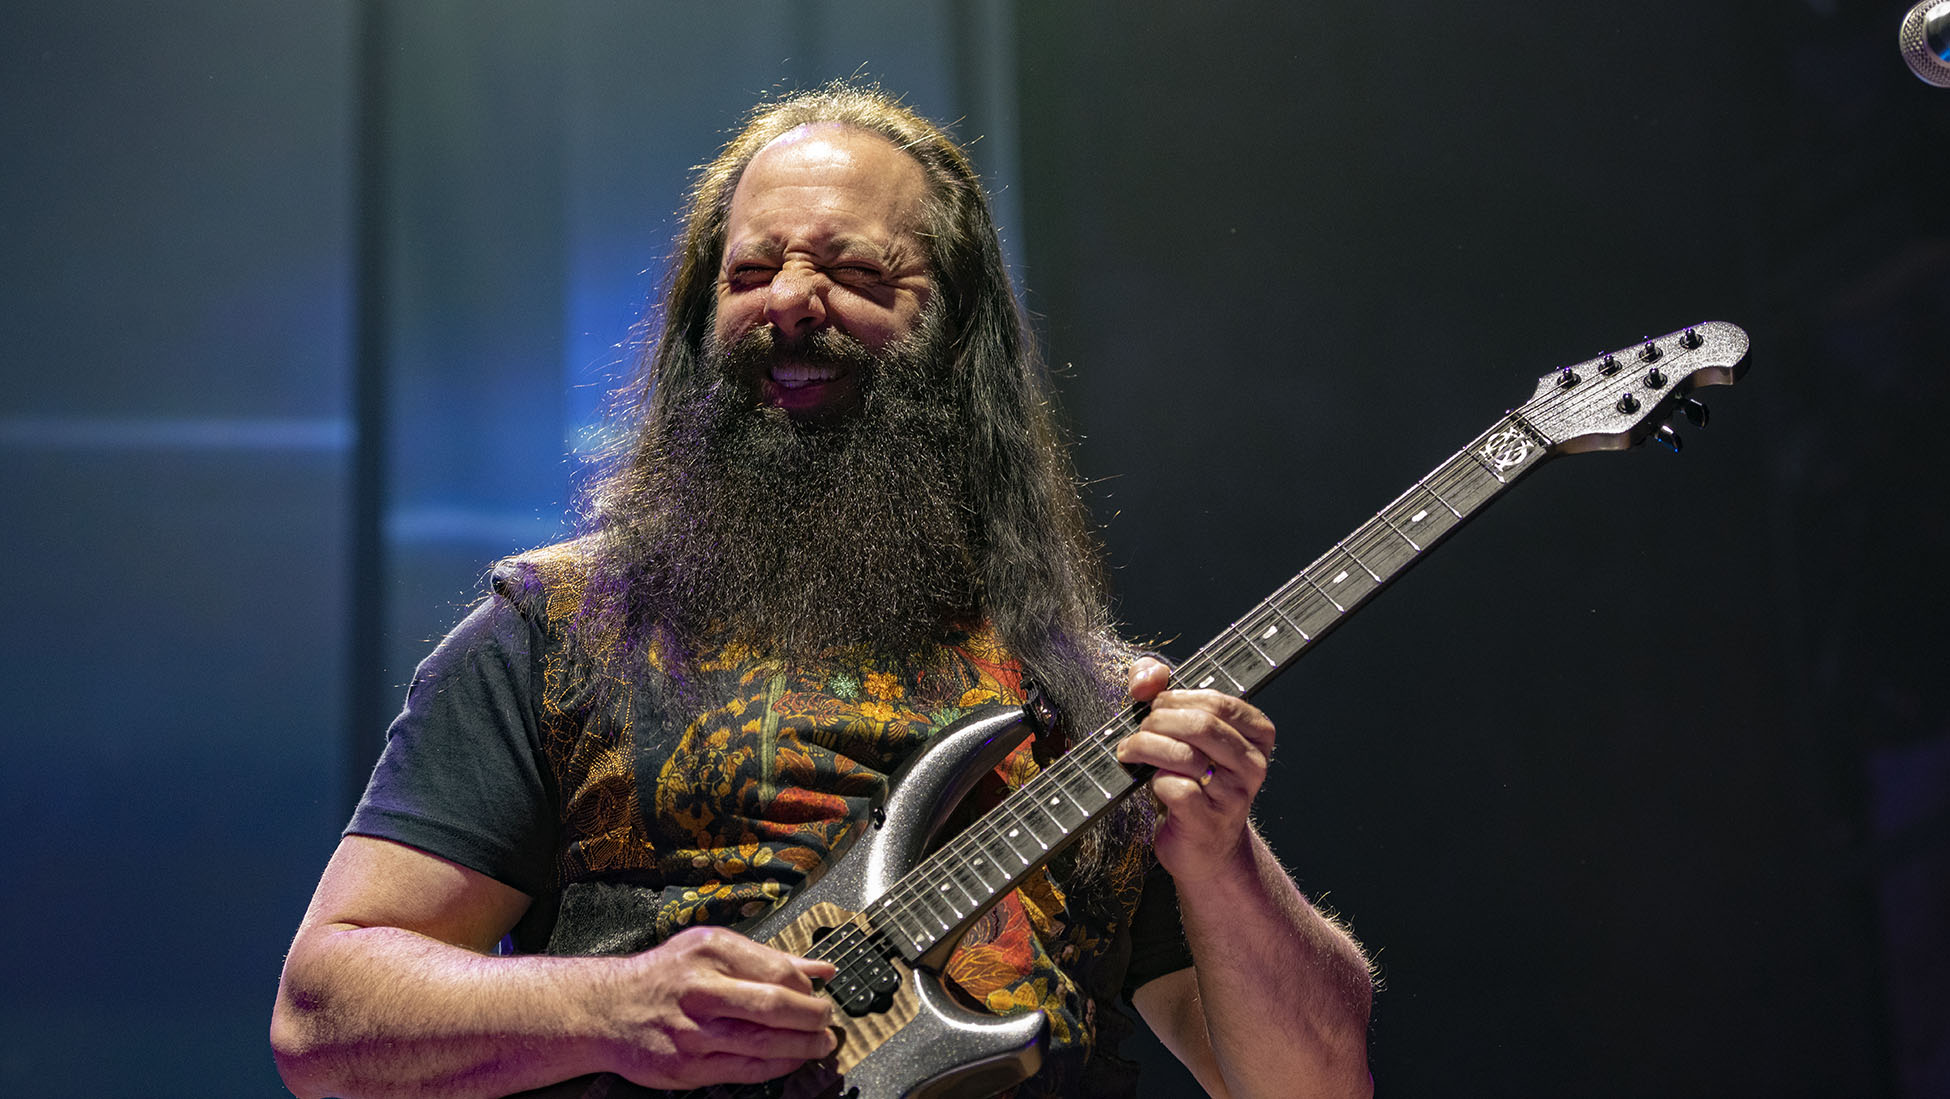 John Petrucci of Dream Theater at the Boch Center, February 25, 2022